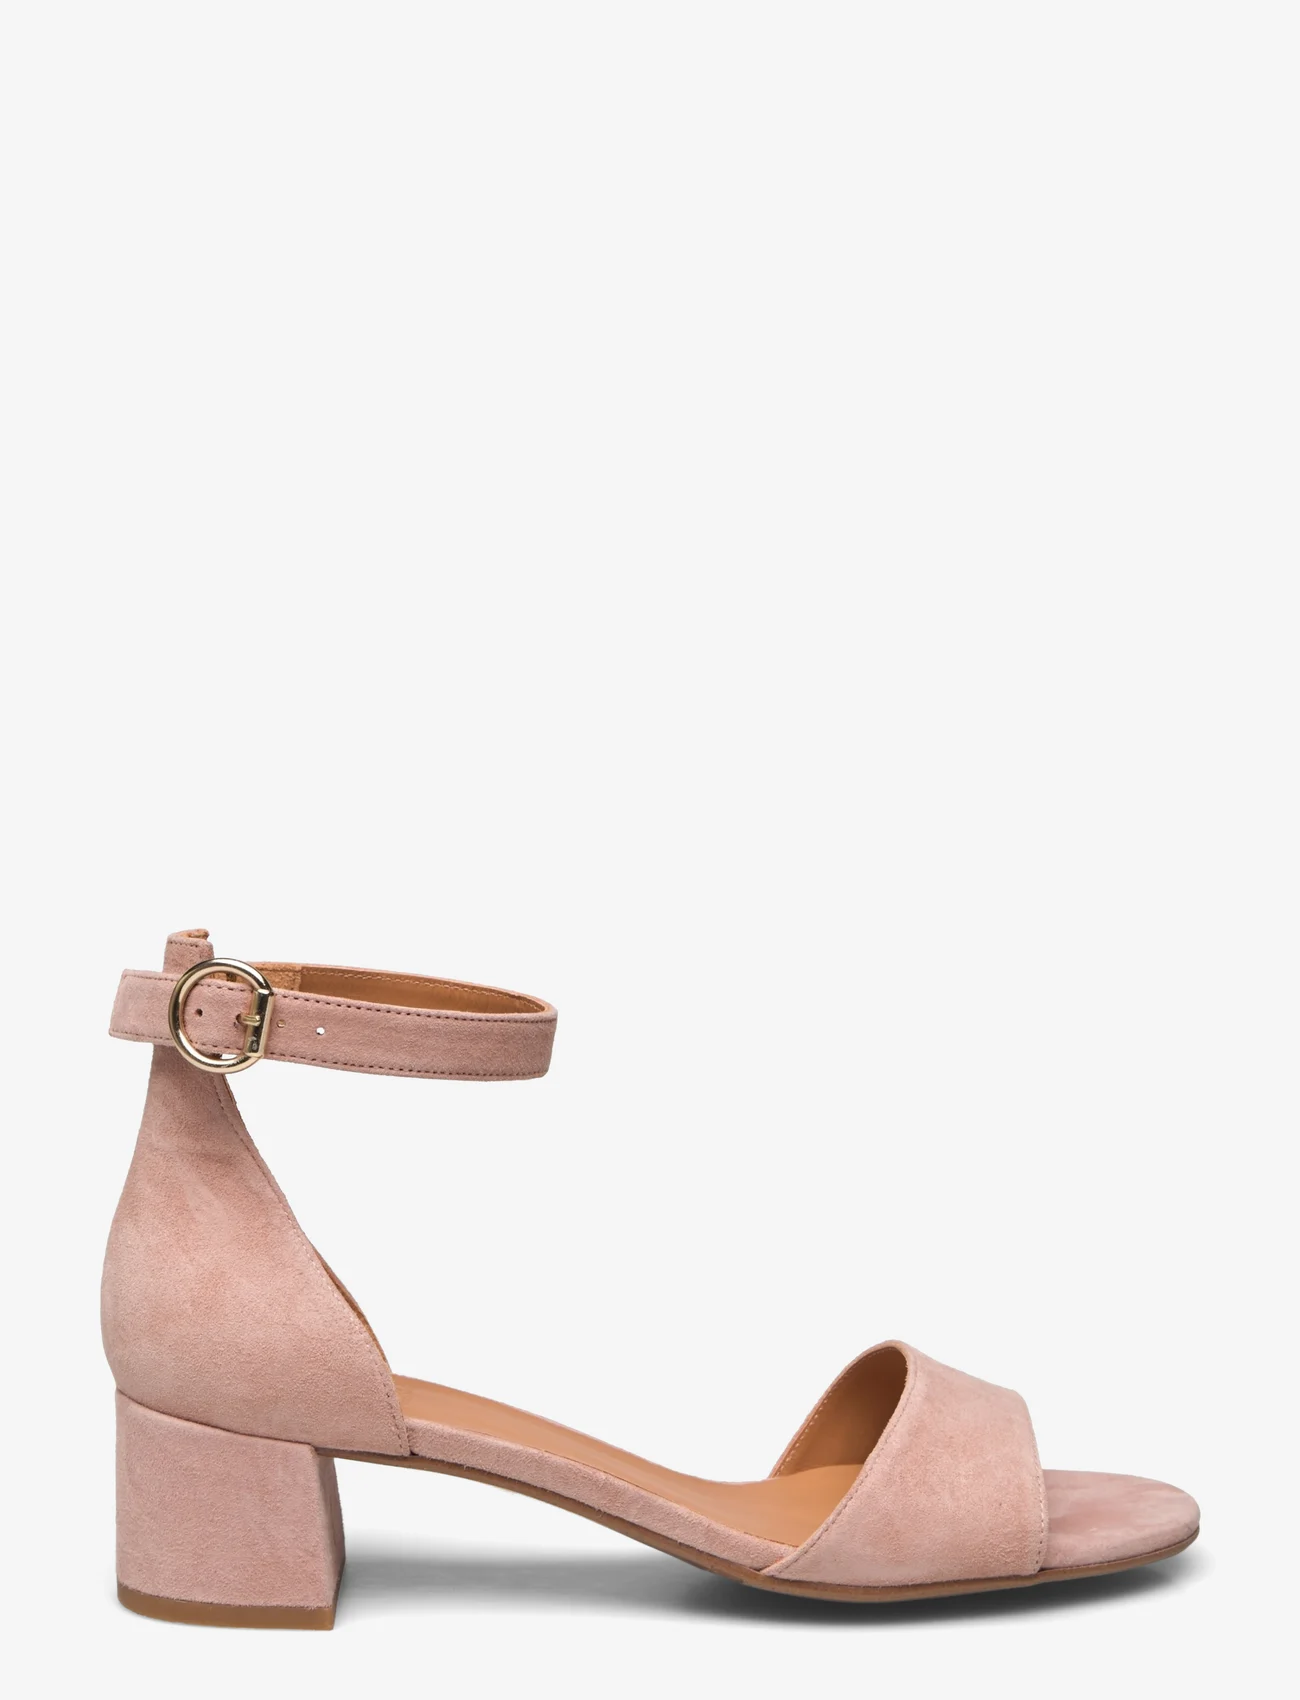 Billi Bi - Sandals - party wear at outlet prices - nude suede - 1